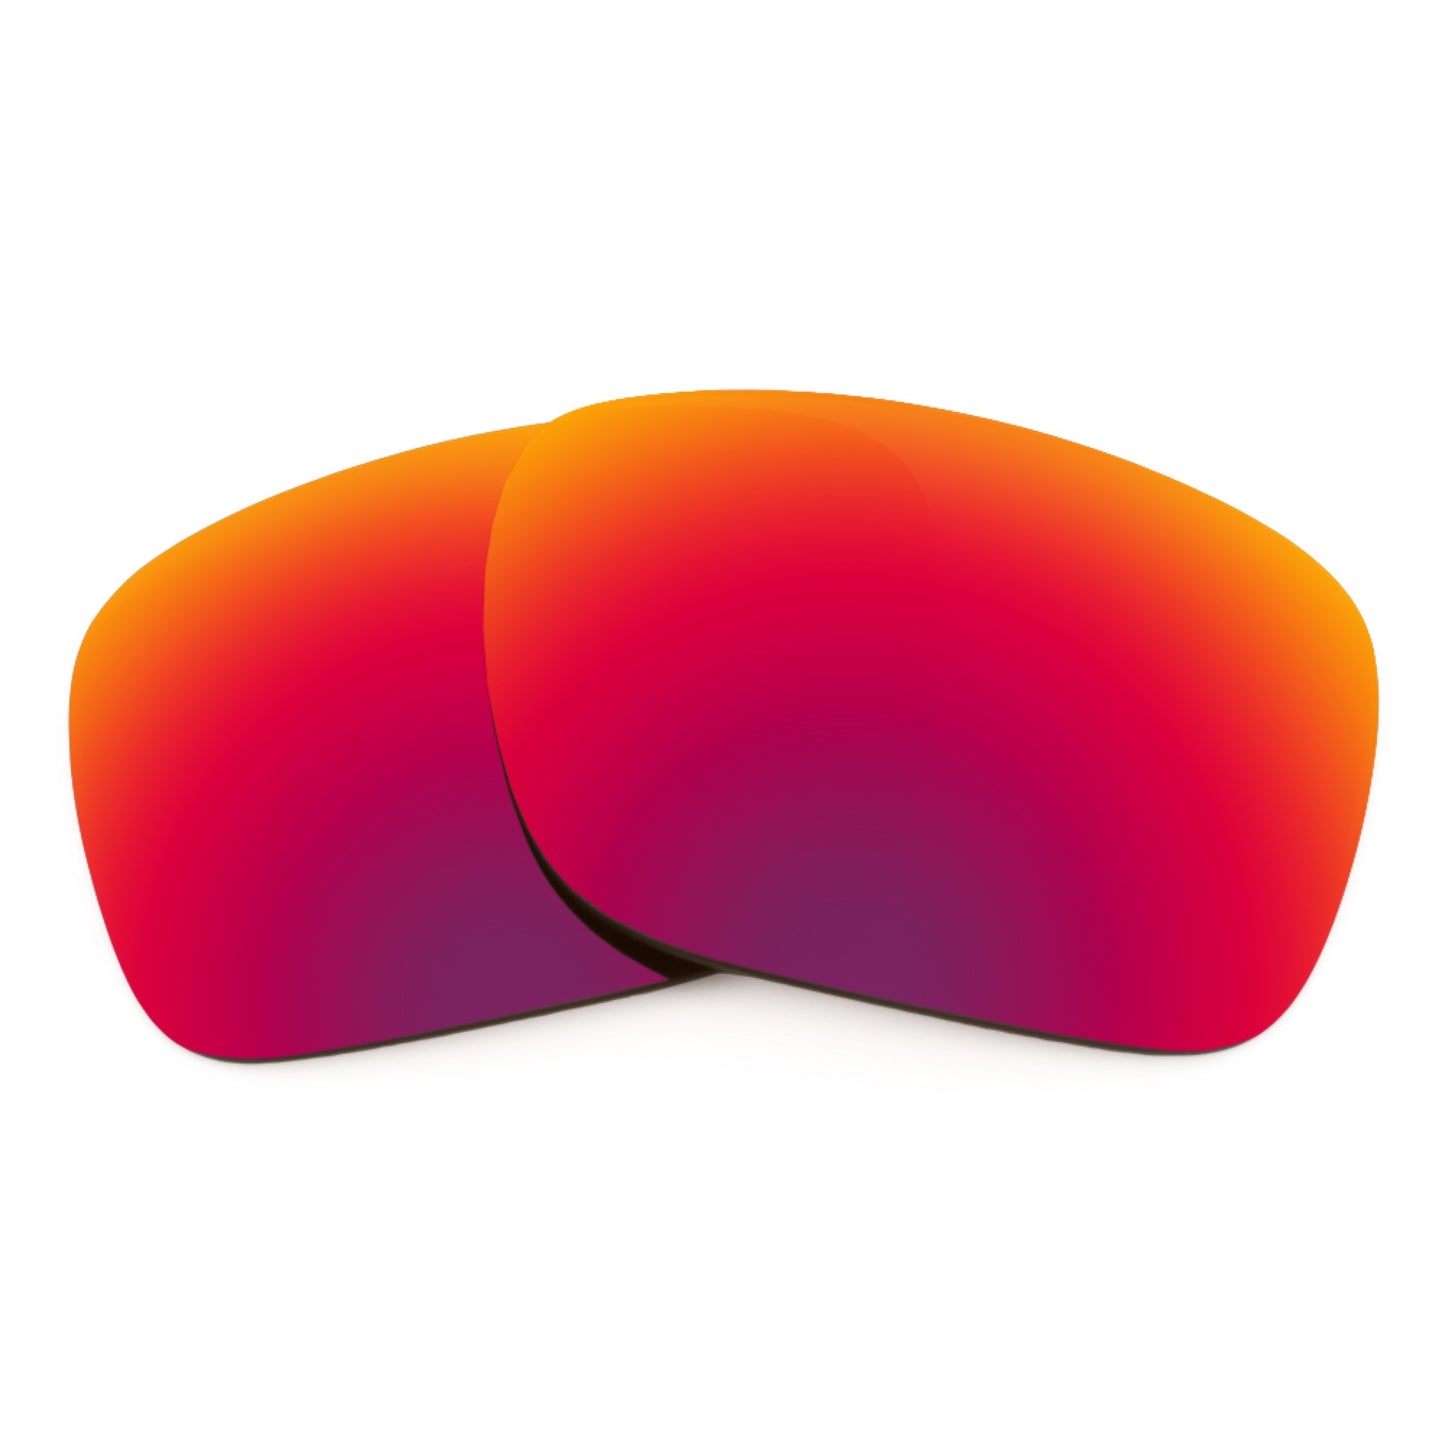 Revant Replacement Lenses for Oakley Holbrook Metal